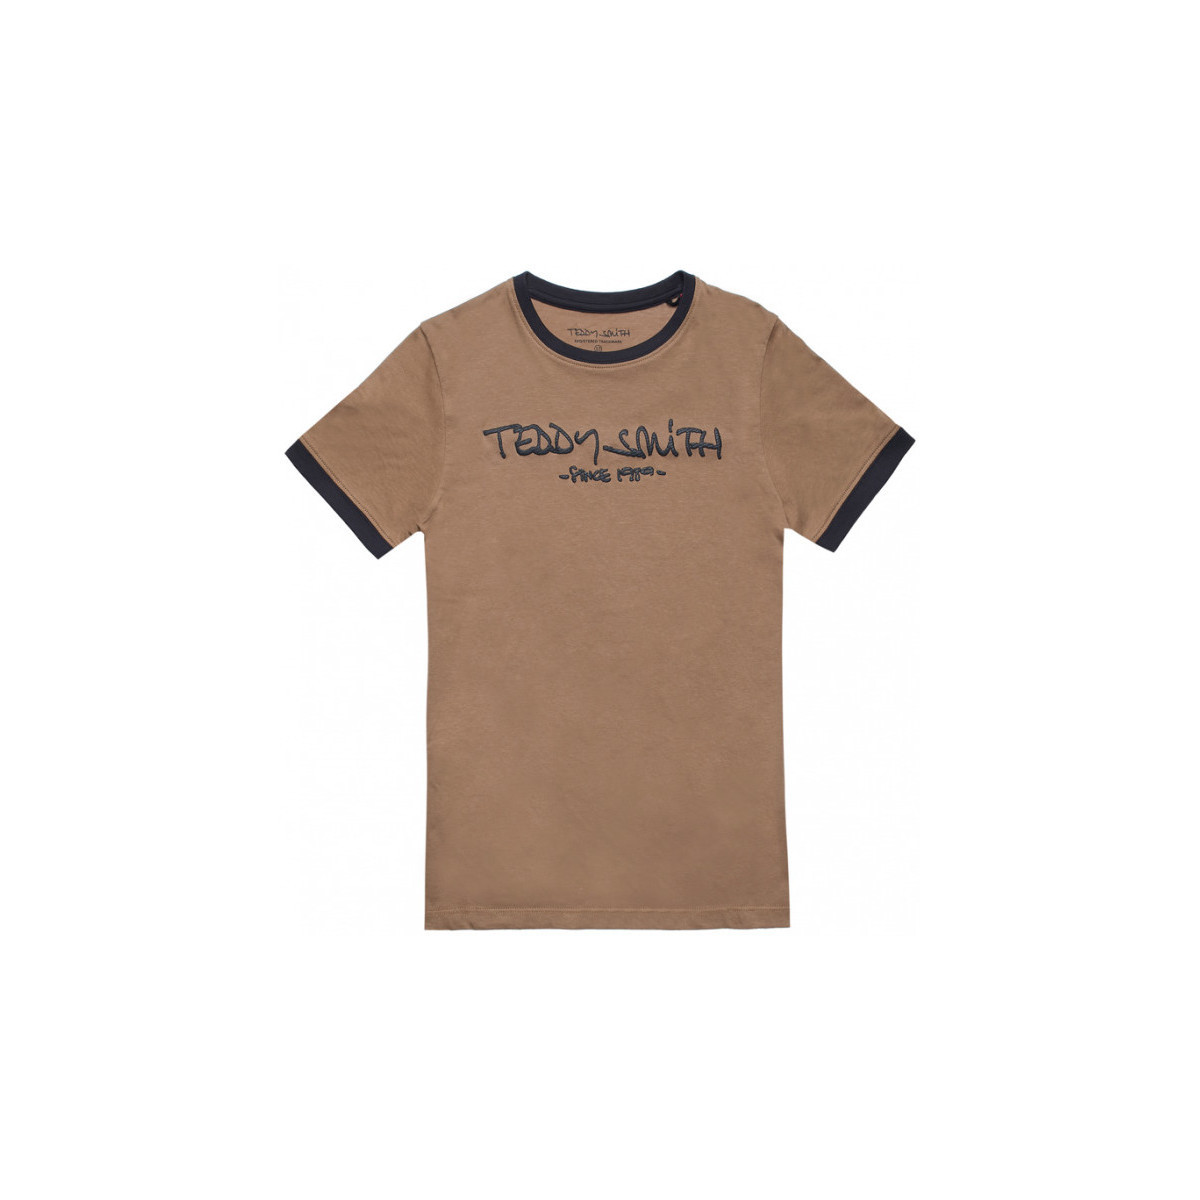 Vêtements Garçon Enhance your everyday collection with this Melted Logo T Shirt from TEE SHIRT TICLASS 3 JR MC - BOIS BRUN - 4 ans Multicolore